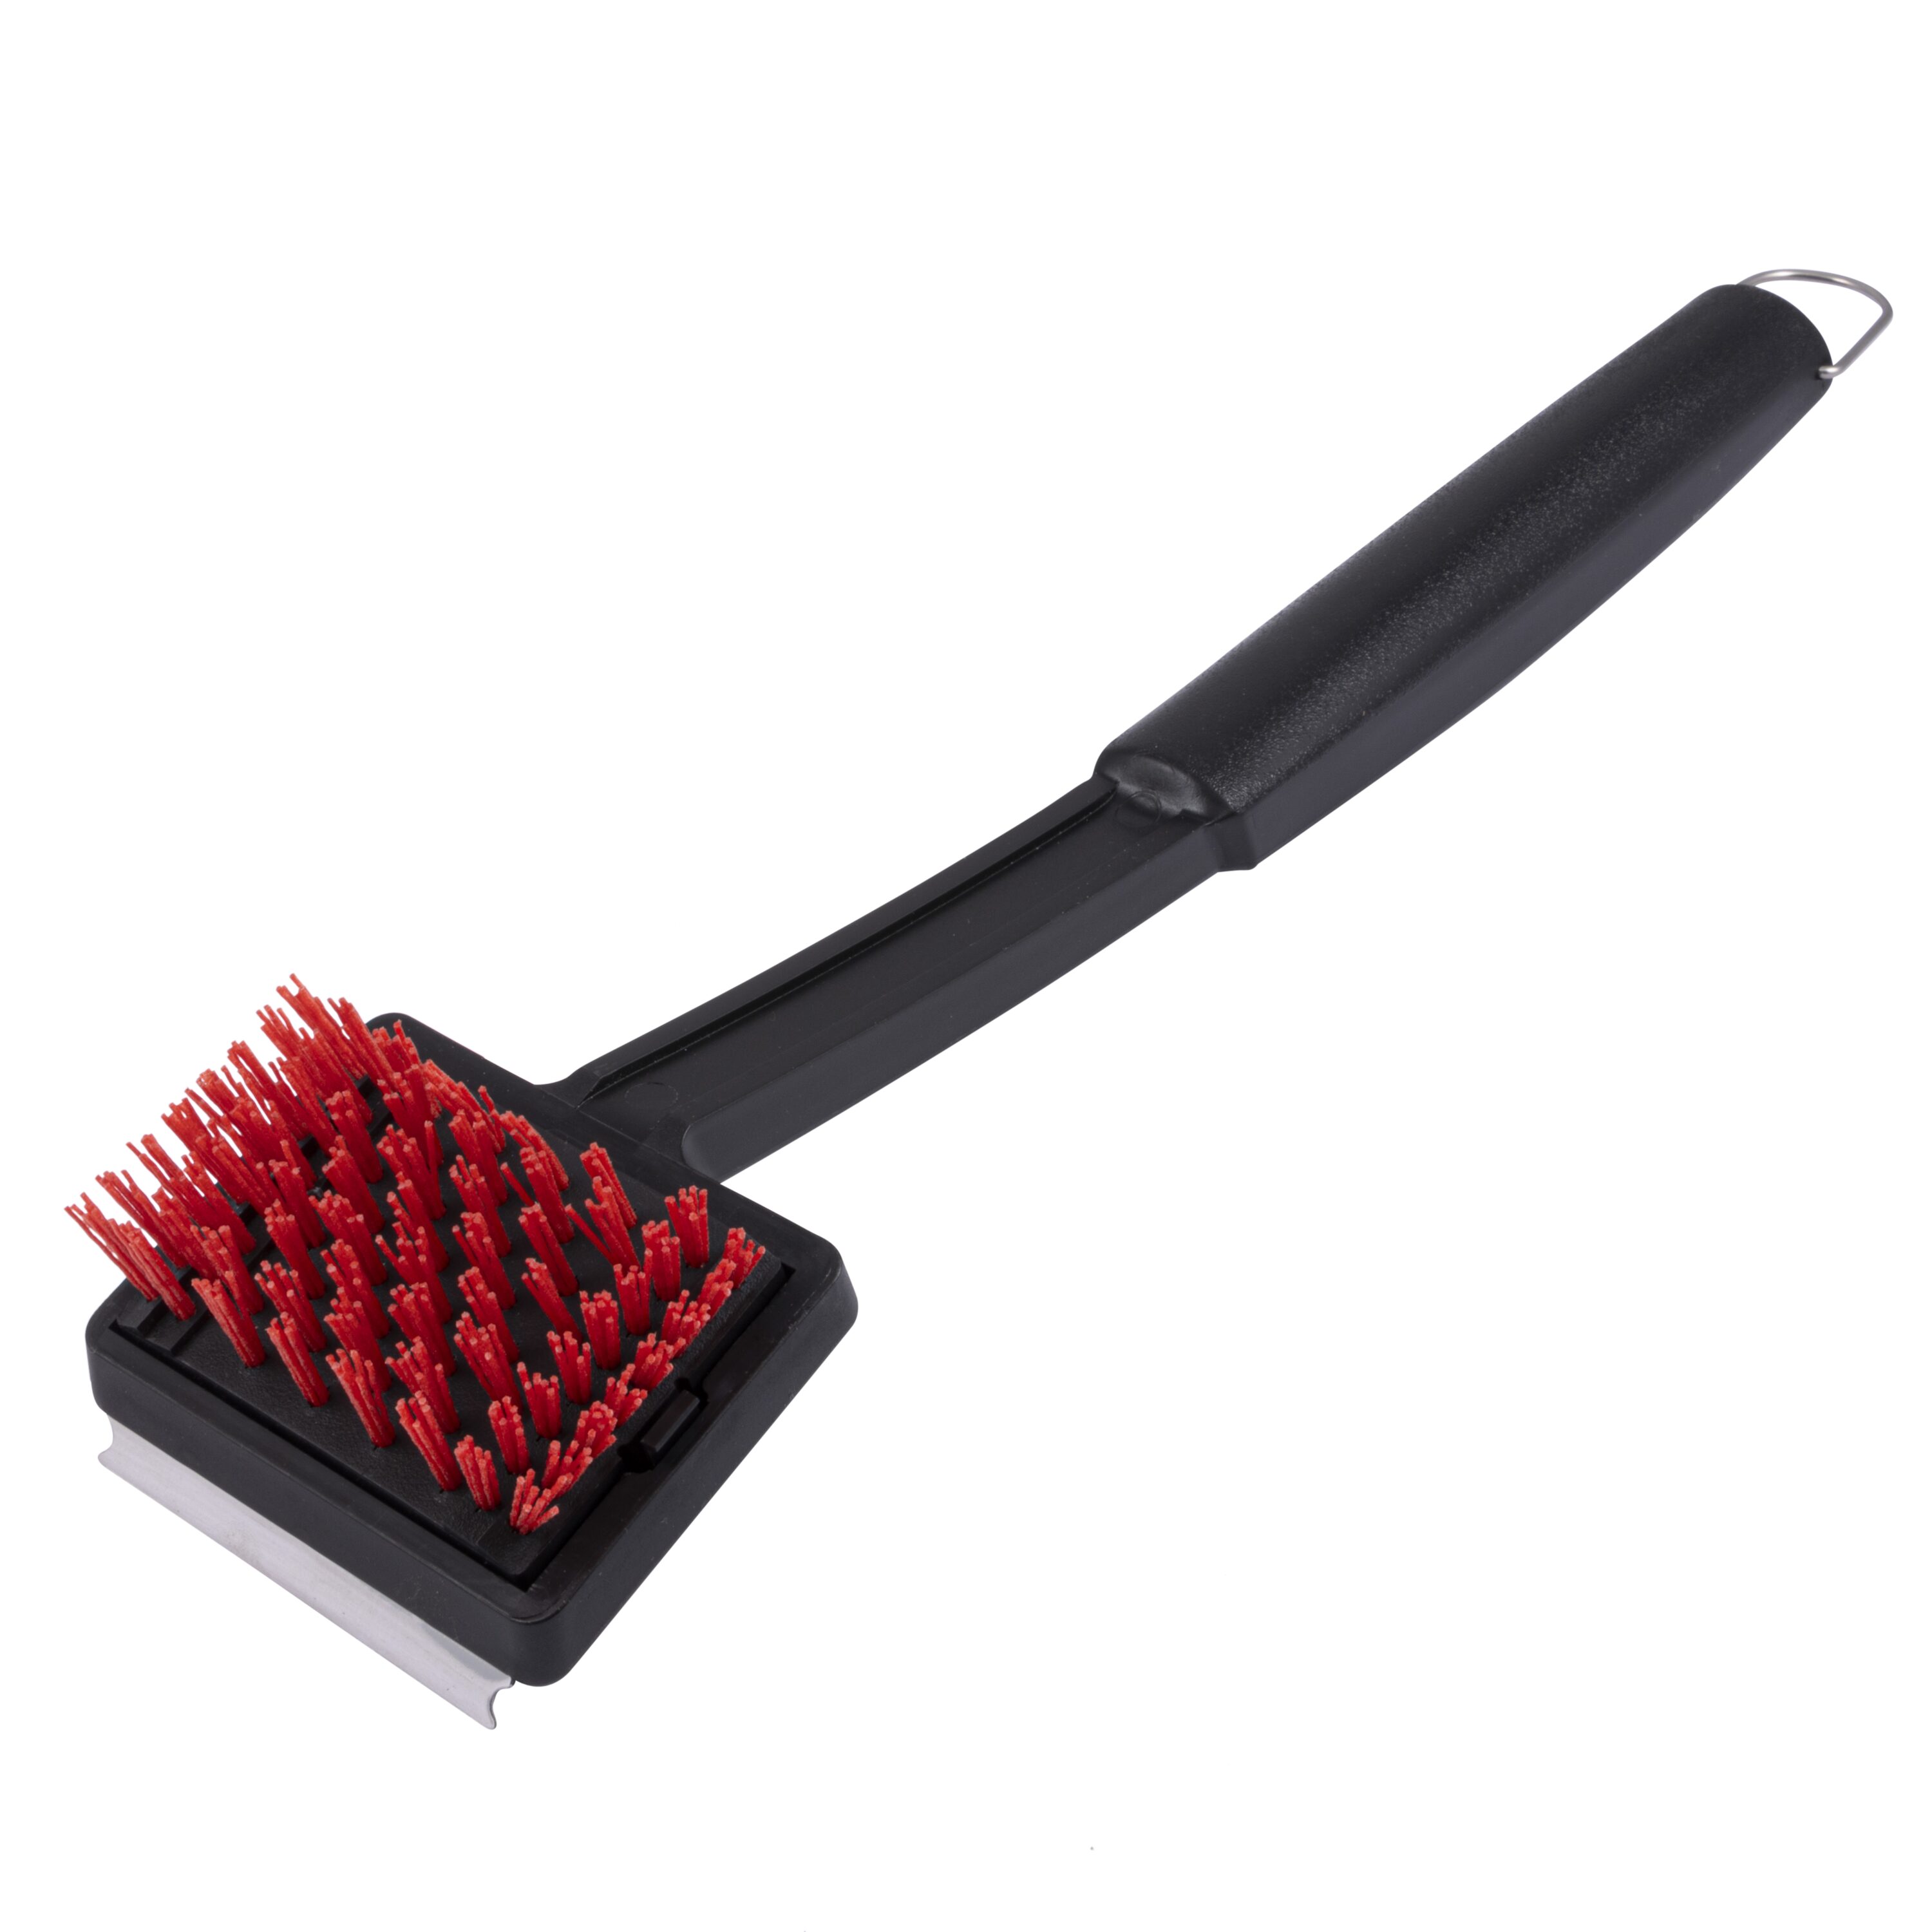 Char-Broil 5788937R12 Safer Replaceable Head Grill Brush / BrandsMart USA